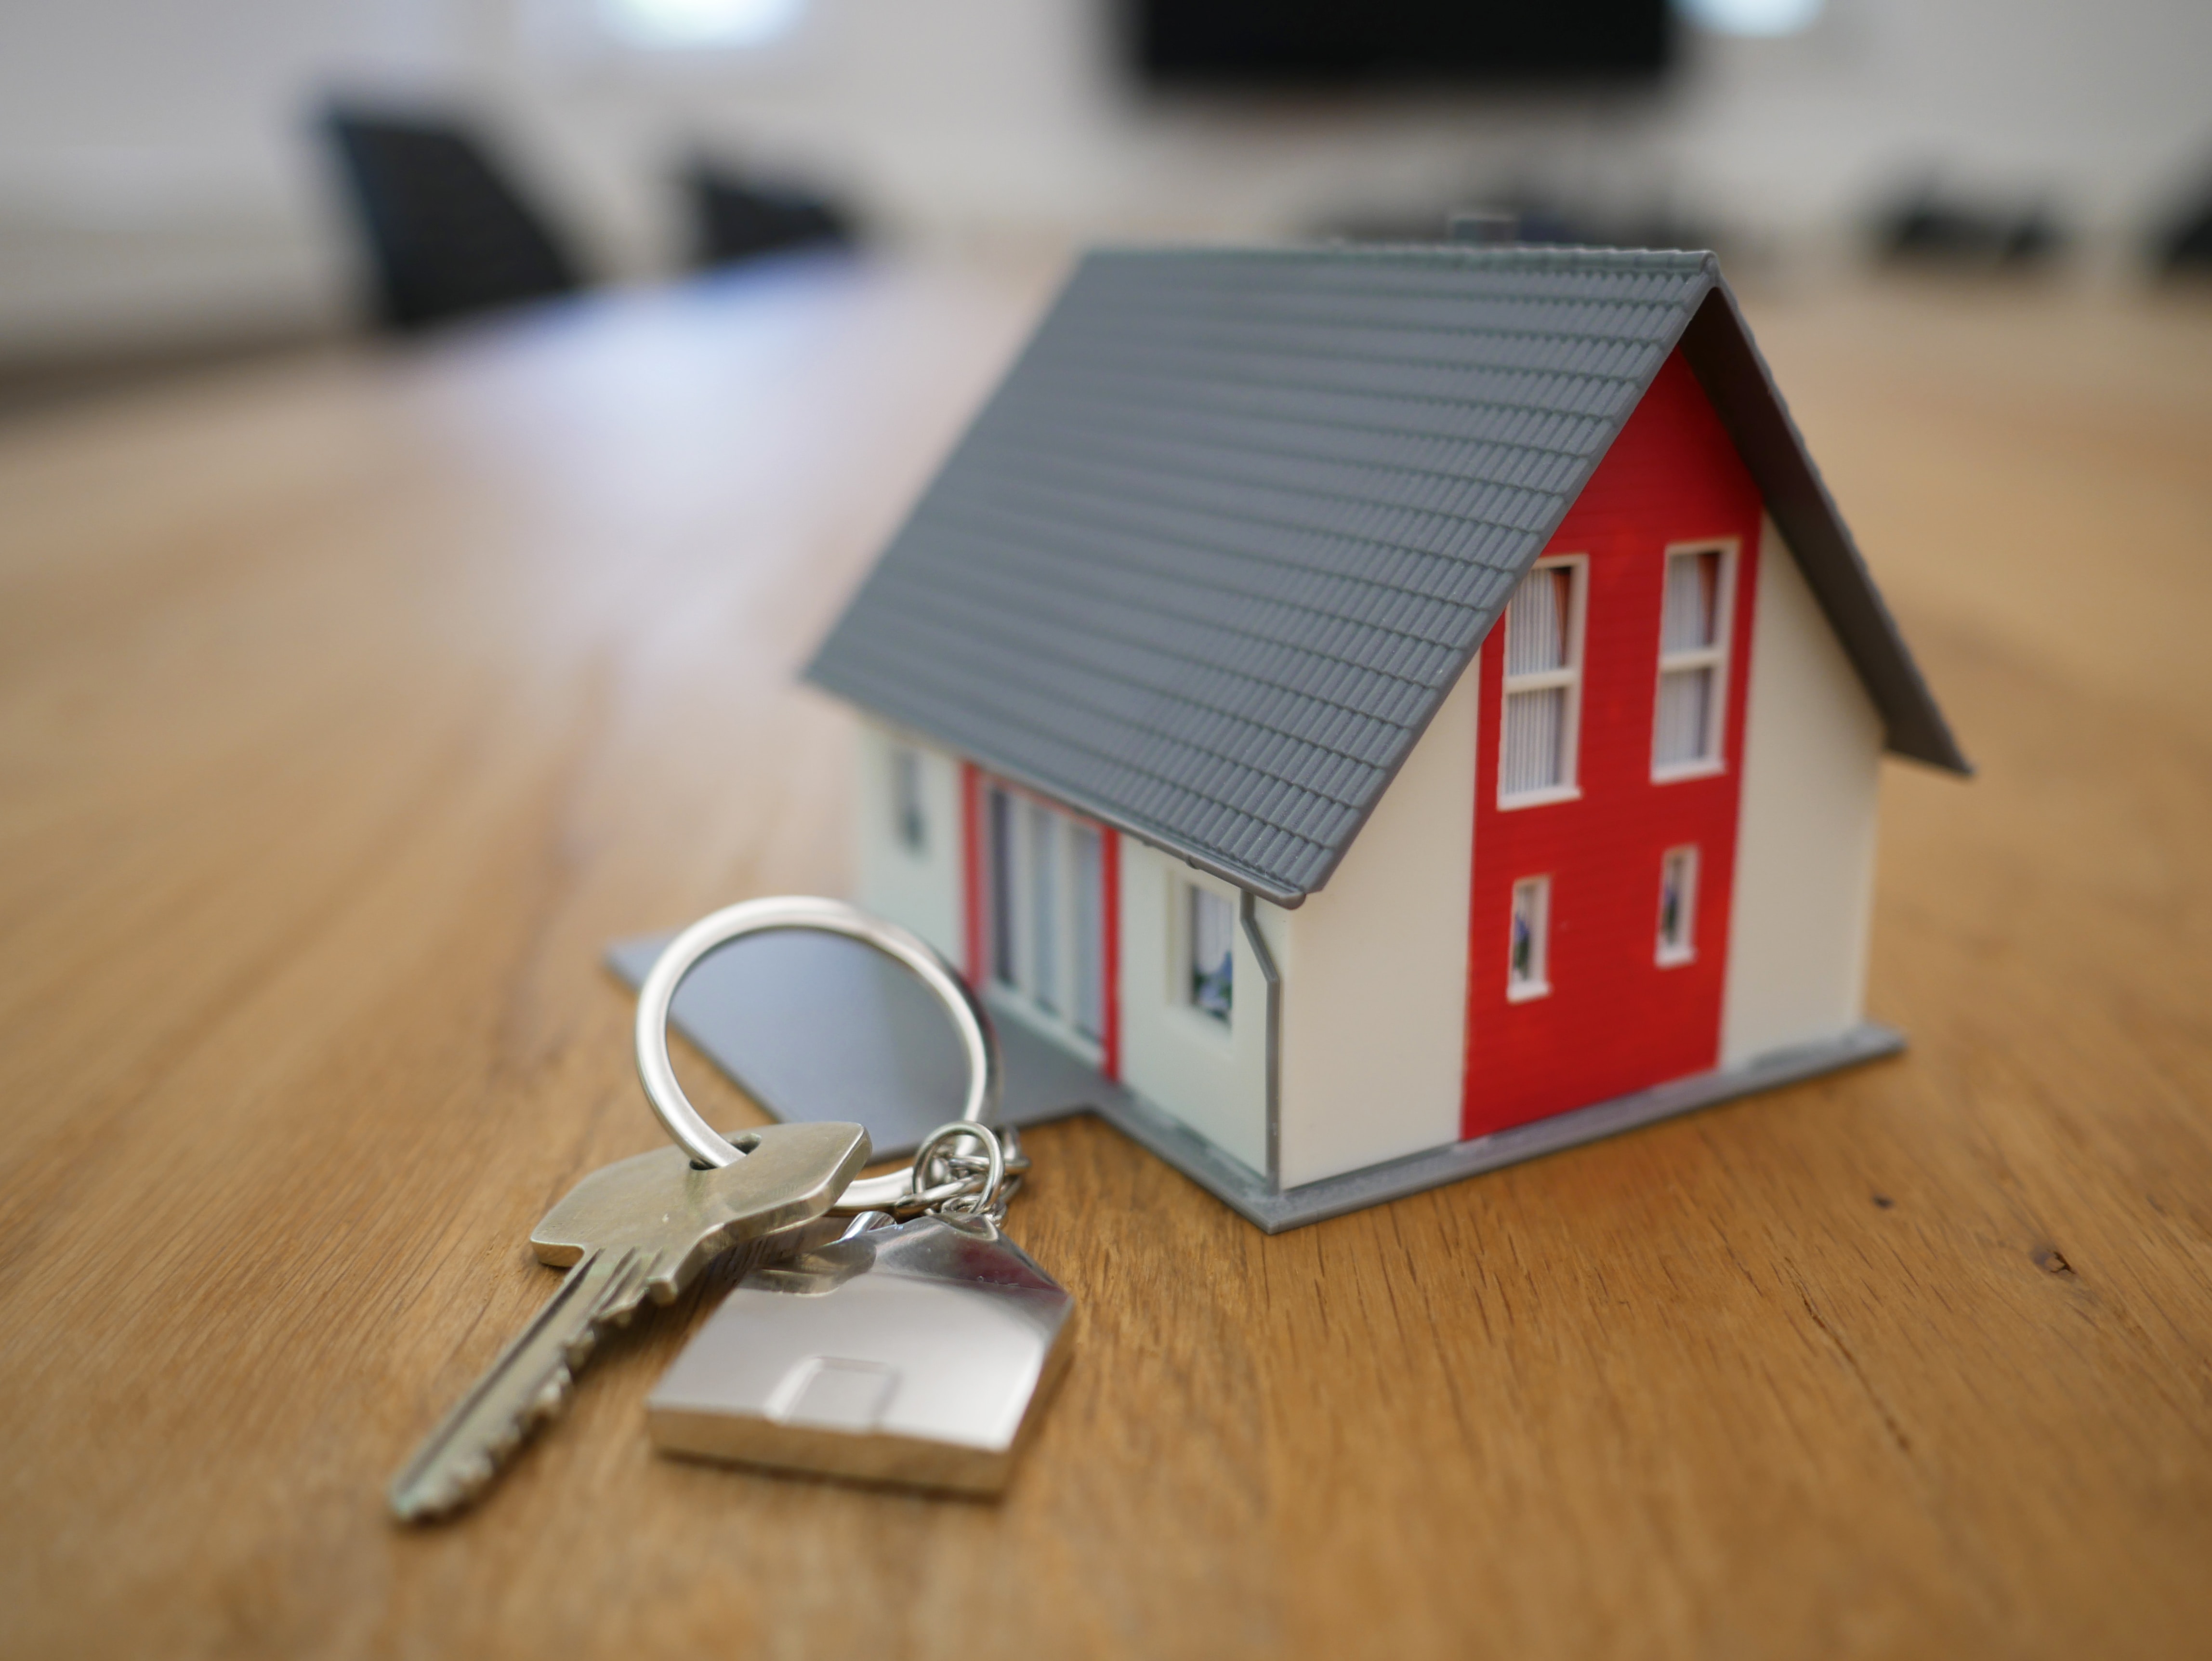 Getting the keys to your new house in Spain